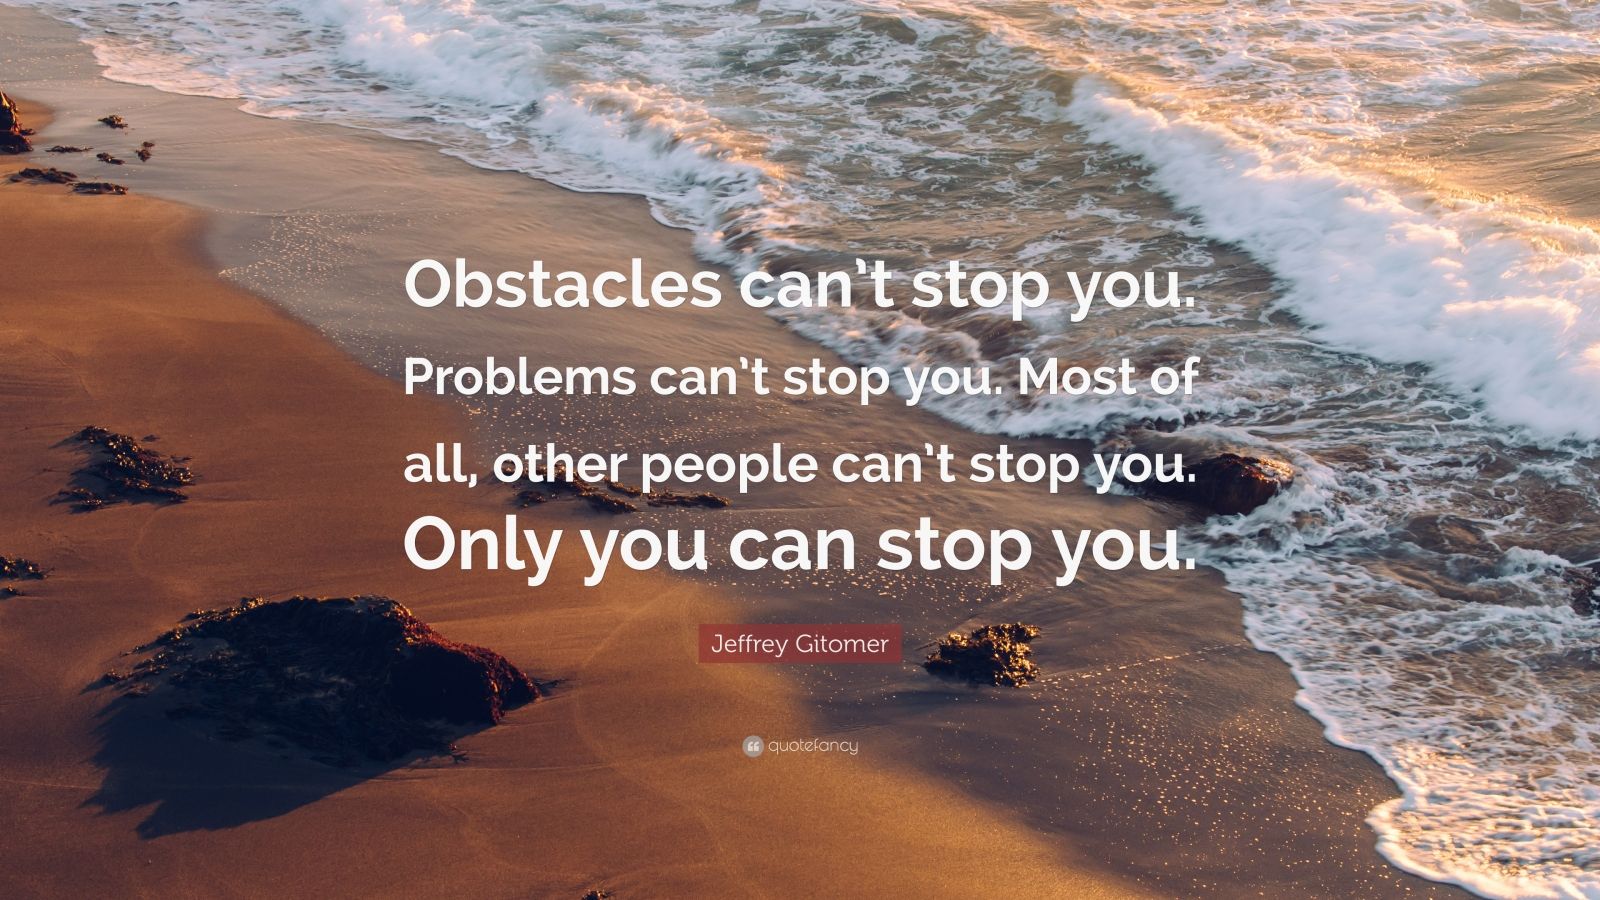 Jeffrey Gitomer Quote: “Obstacles can’t stop you. Problems can’t stop ...